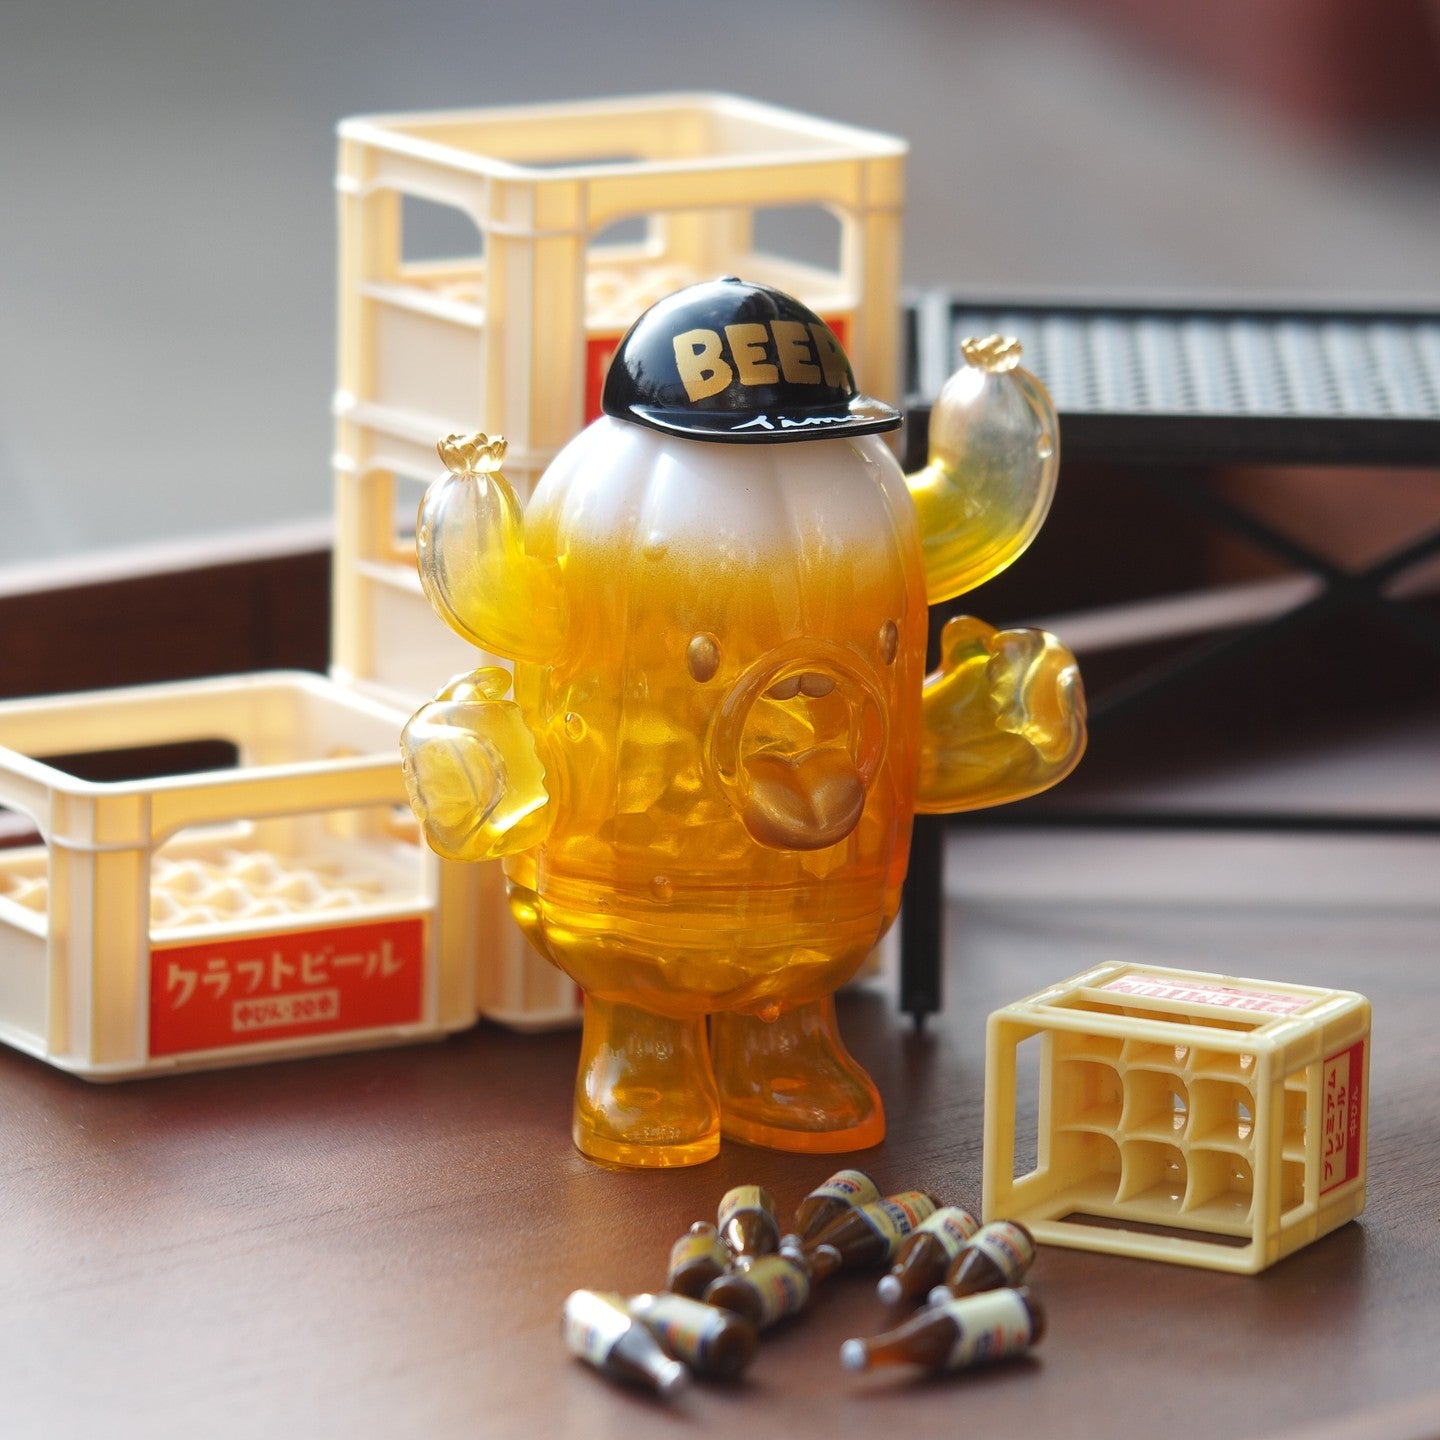 A blind box toy named BEER PATU, made of soft vinyl, 10 cm tall, depicted on a table with a plastic toy bear and small bottles. Preorder - Ships Late May 2024.